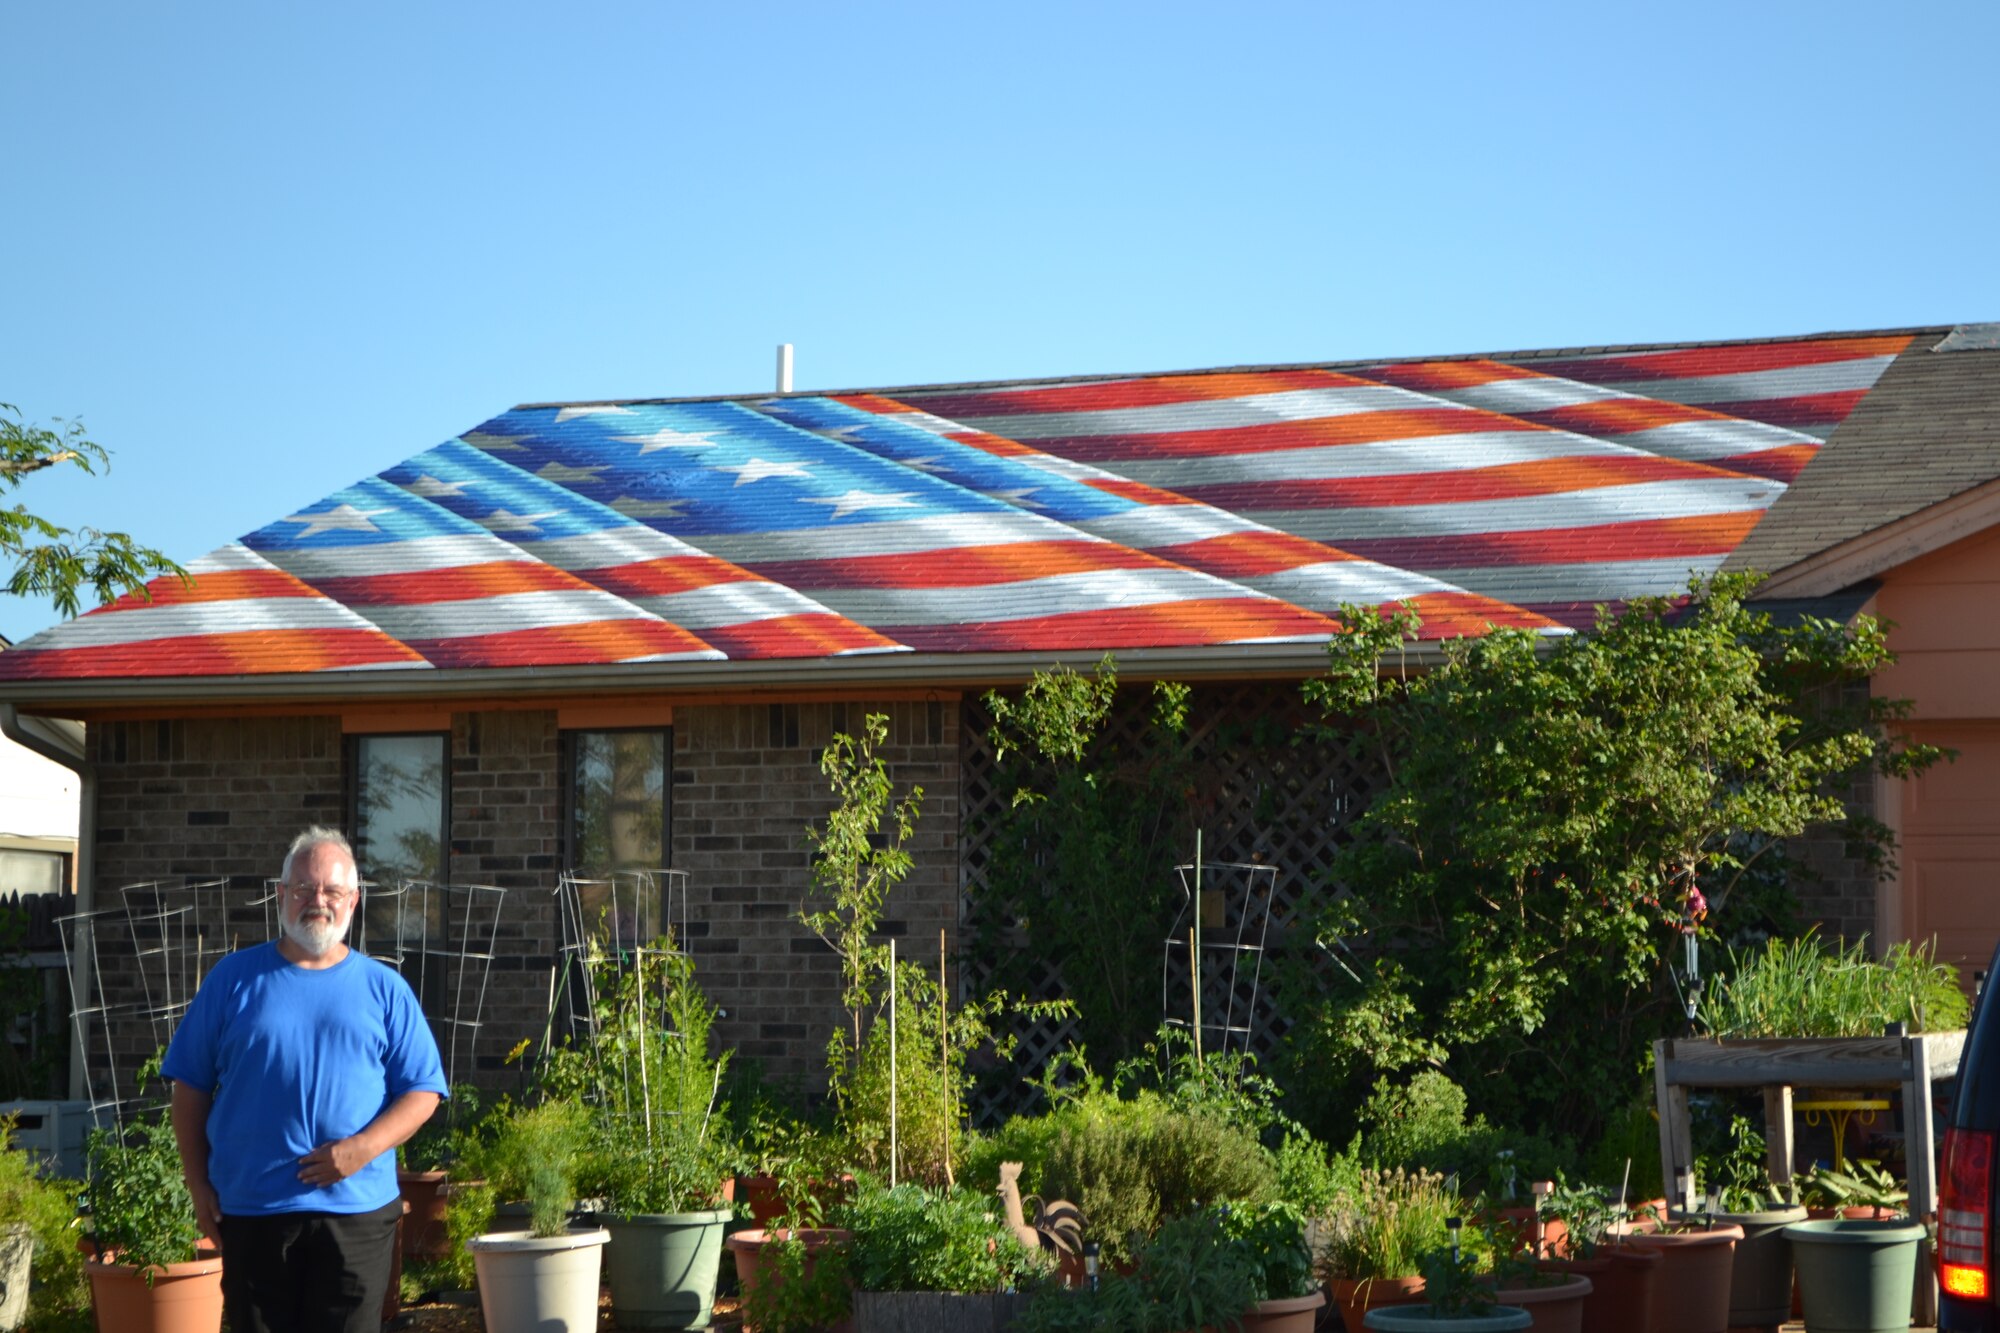 Edwin Kincaid, a subject matter expert technical lead within the Air Force Sustainment Center Engineering Directorate, said he and his wife, Edith, were honored to represent Moore when an artist from New York asked to paint a flag on their roof. (Air Force photo by April McDonald)